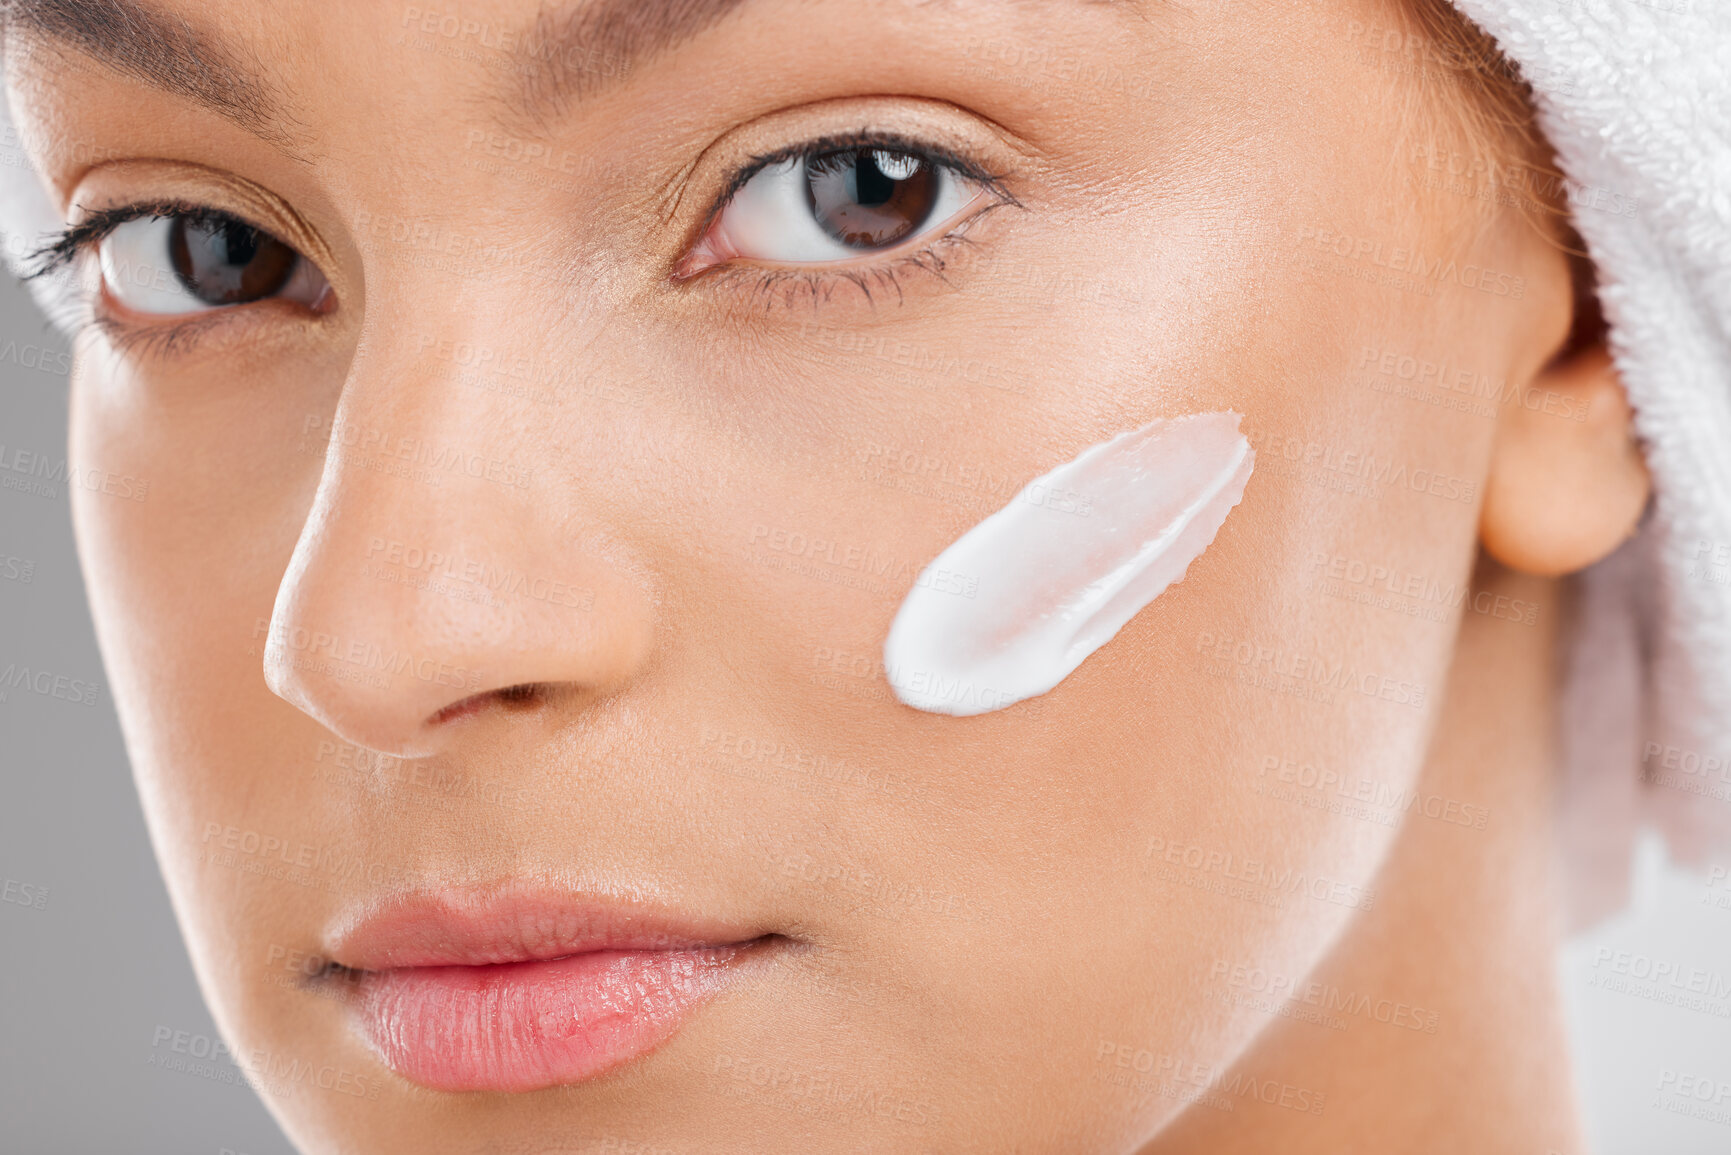 Buy stock photo Shot of an attractive young woman applying moisturiser to her face against a studio background